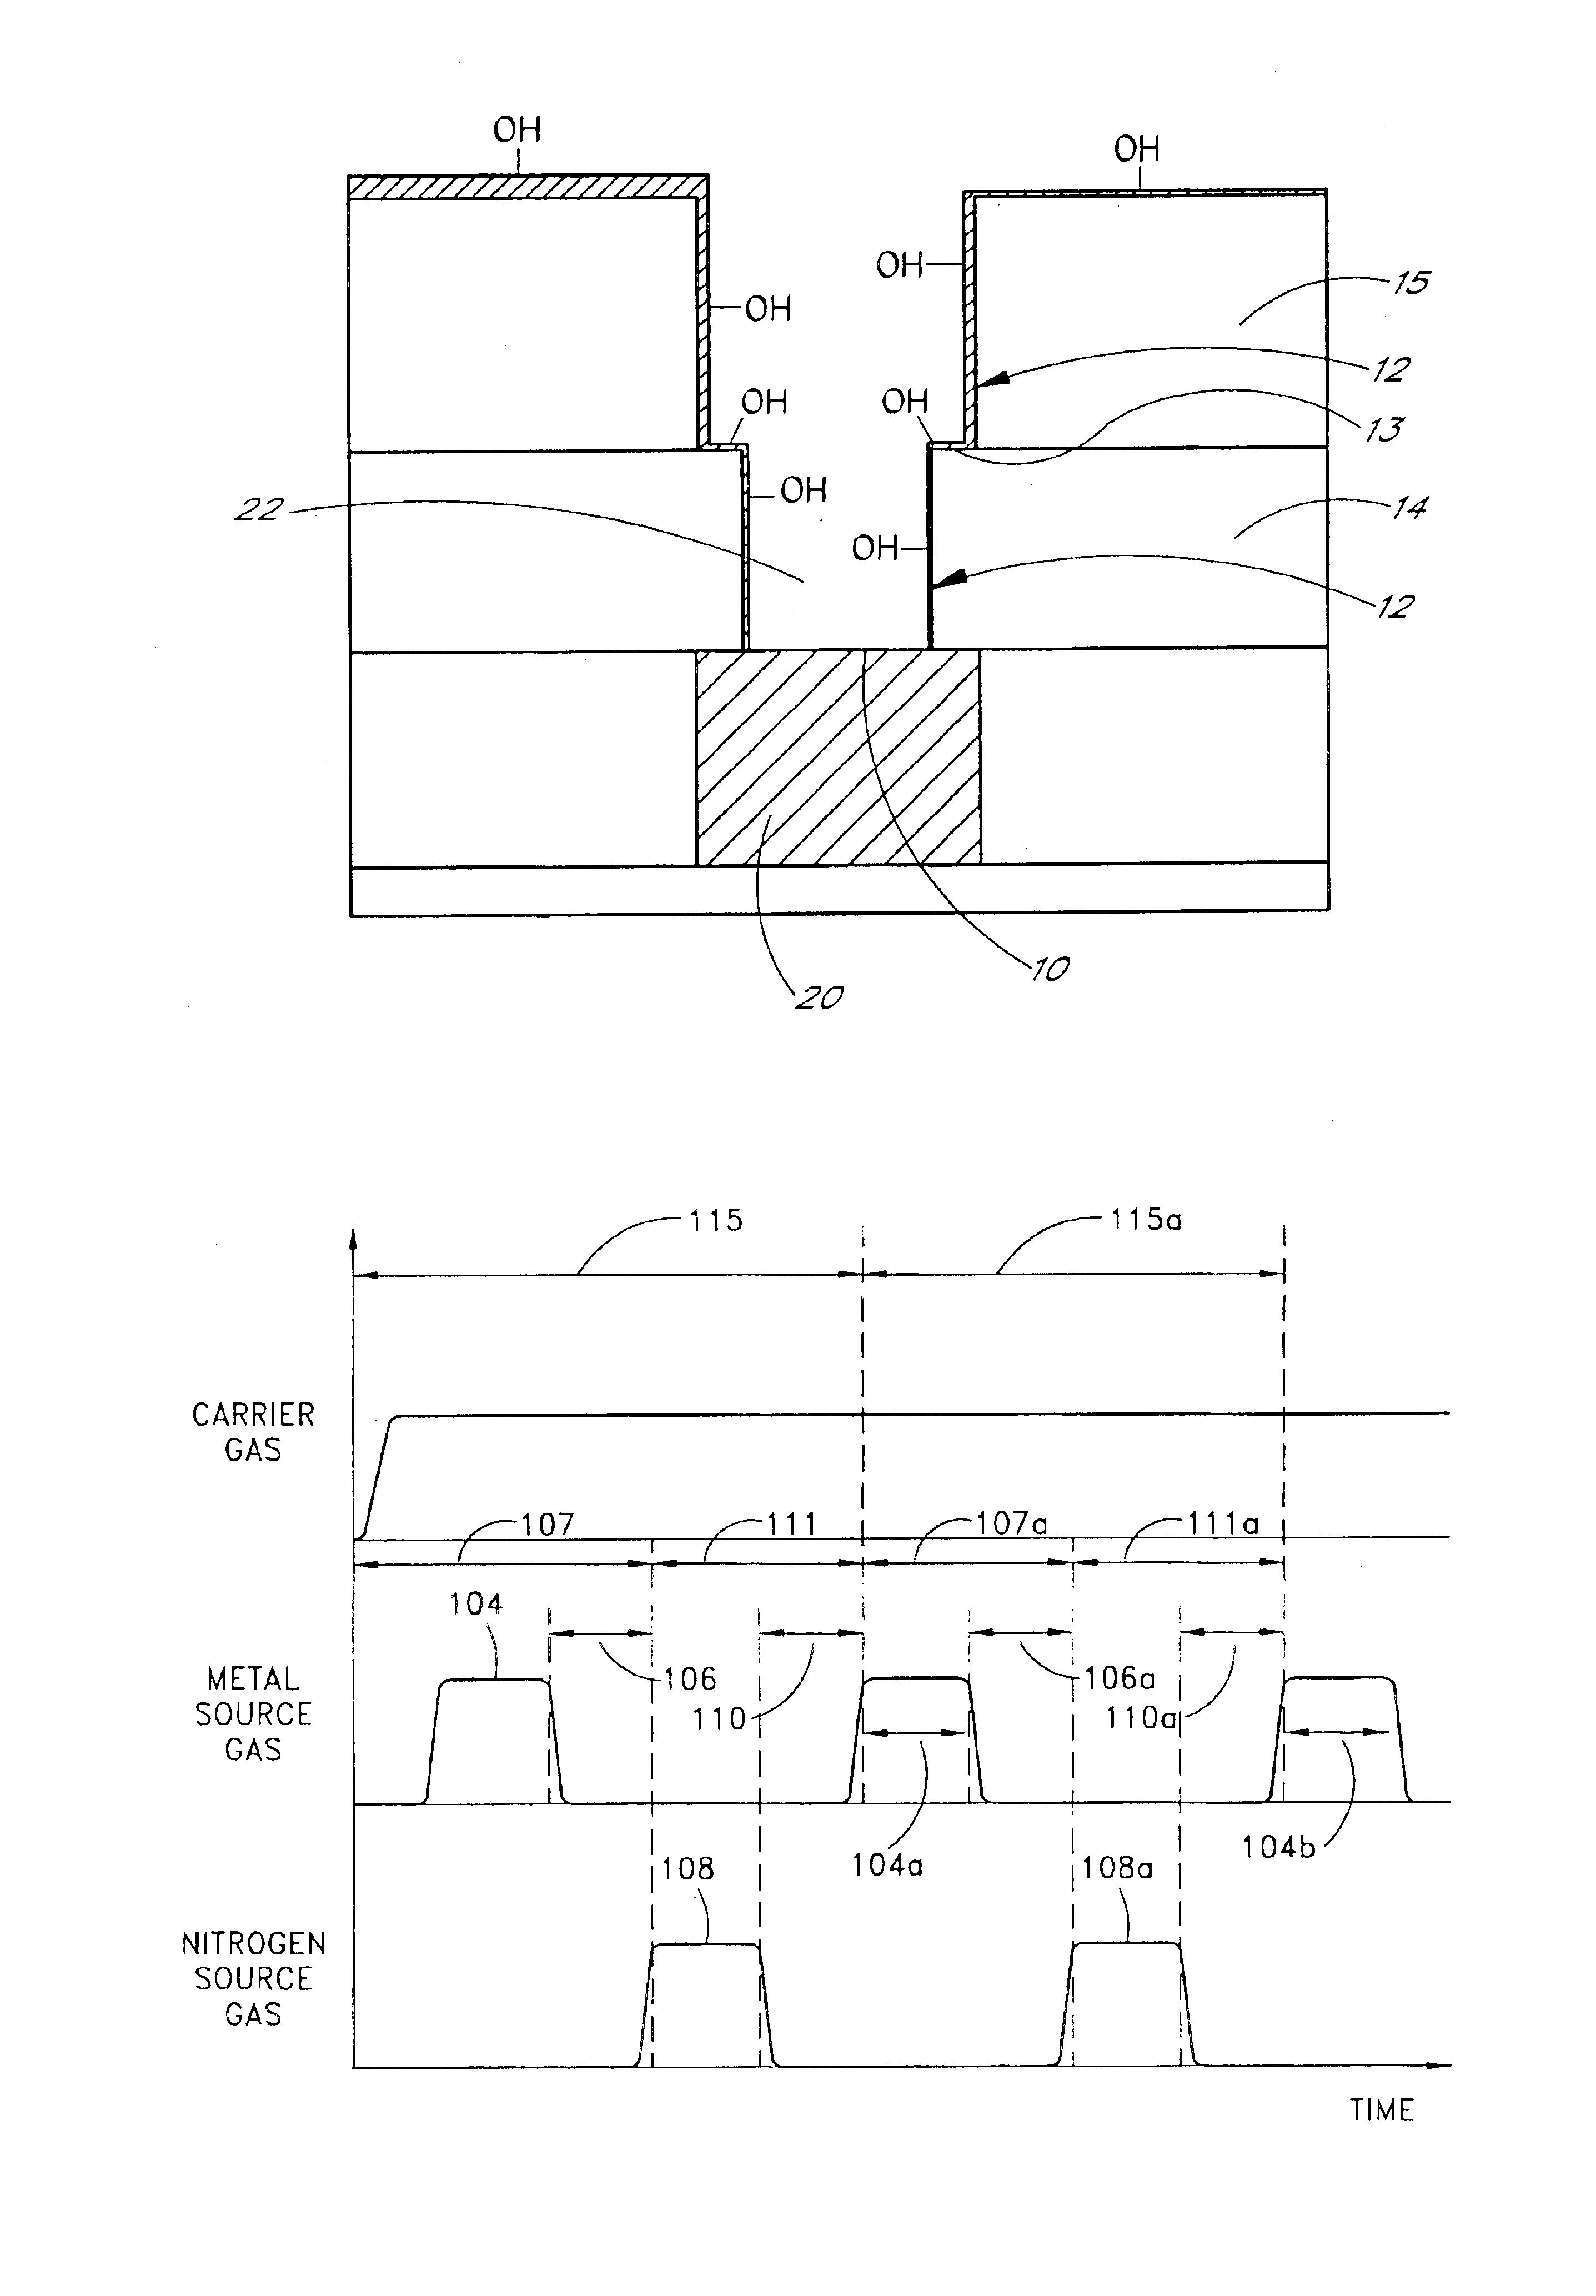 Method for bottomless deposition of barrier layers in integrated circuit metallization schemes